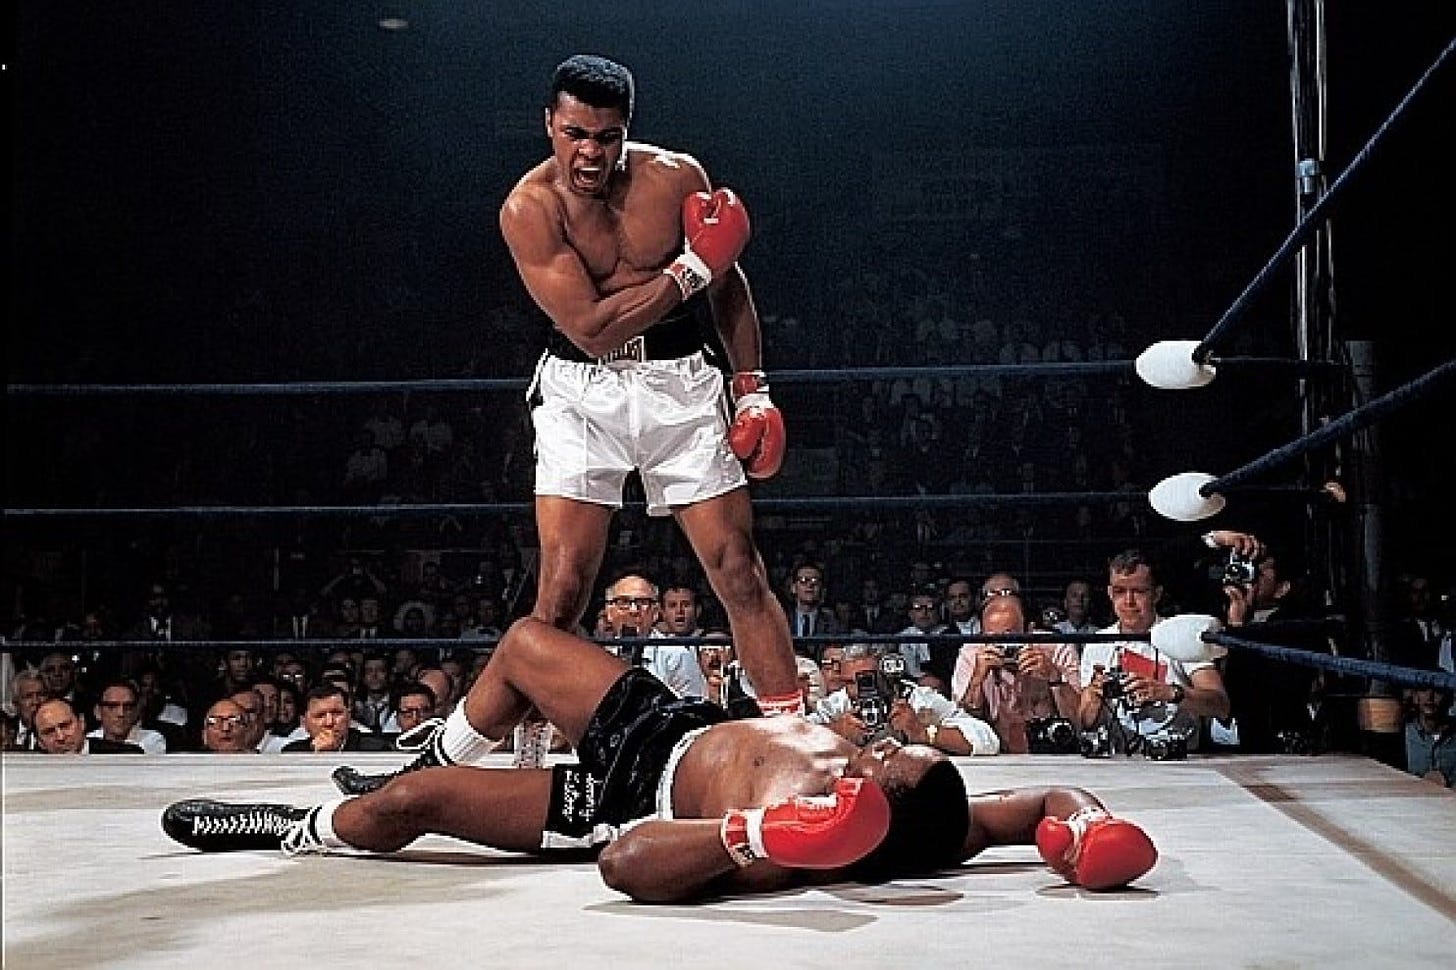 Ali's iconic look after knockout.